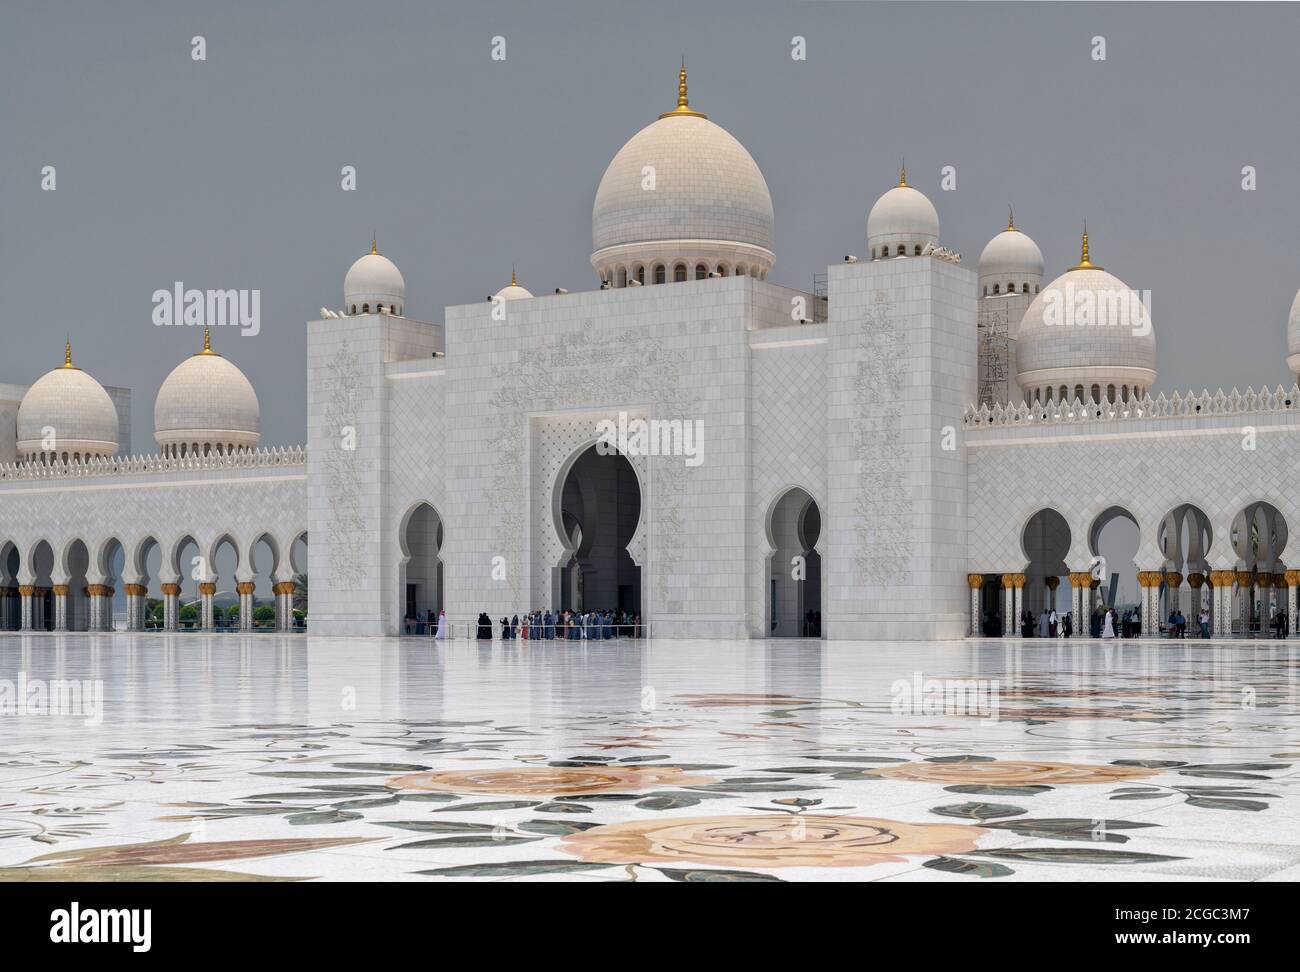 A day shot of the Sheikh Zayed Grand Mosque, Abu Dhabi entrance and central inner courtyard, marble floor with floral design, domes, arches, columns and tourists. Mosque completed 2007. Stock Photo